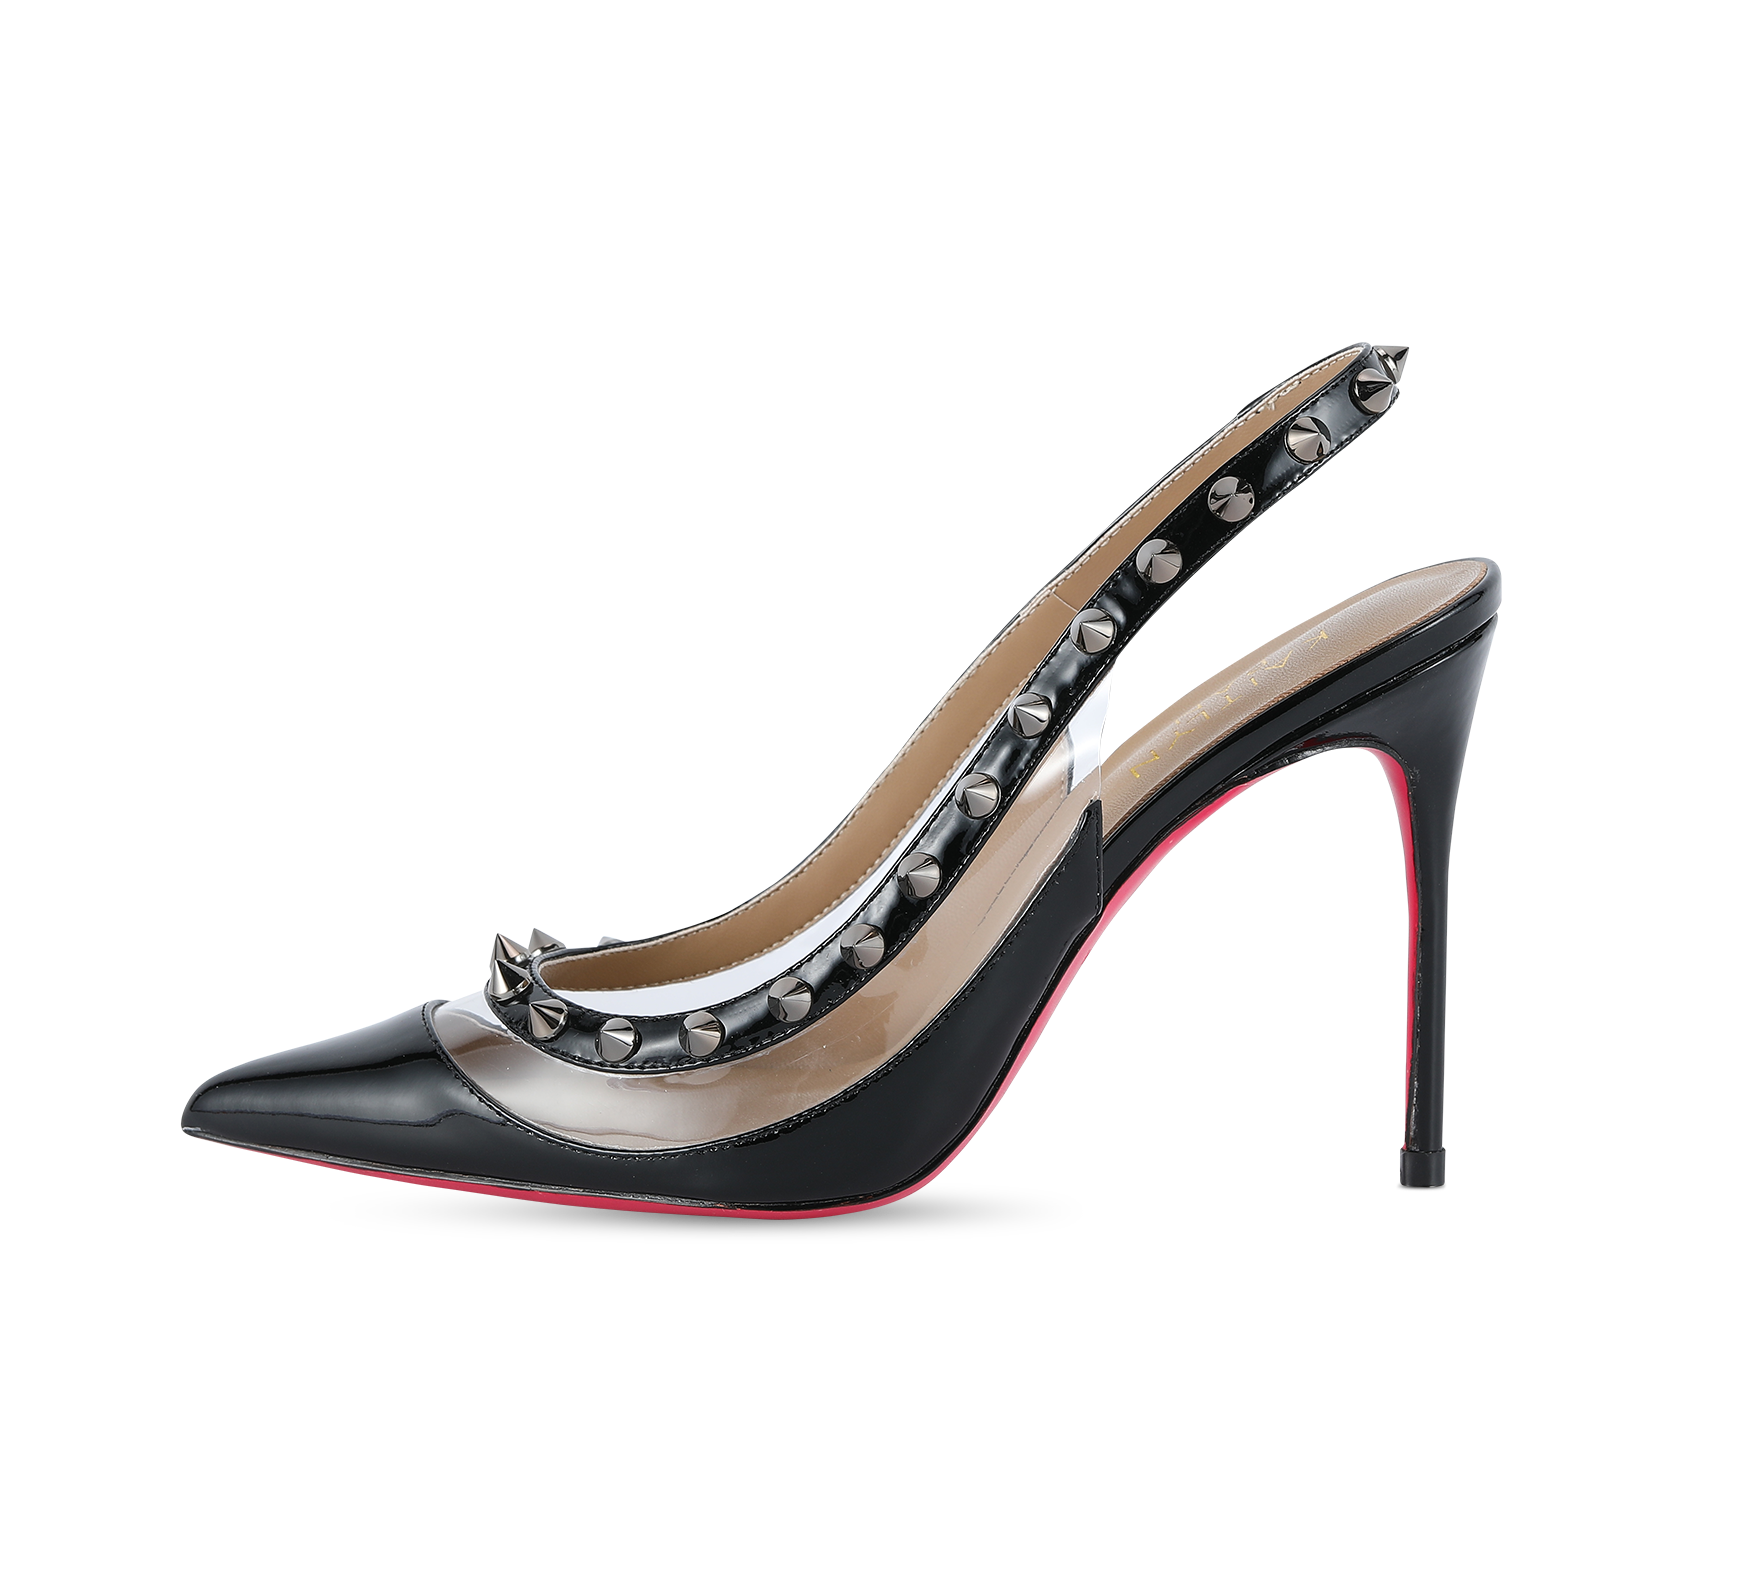 Pointed Toe Pink Sole High Heel Pumps Silver Patent Leather / 10.5US/42EU/44CN | by Kaitlyn Pan | Pumps